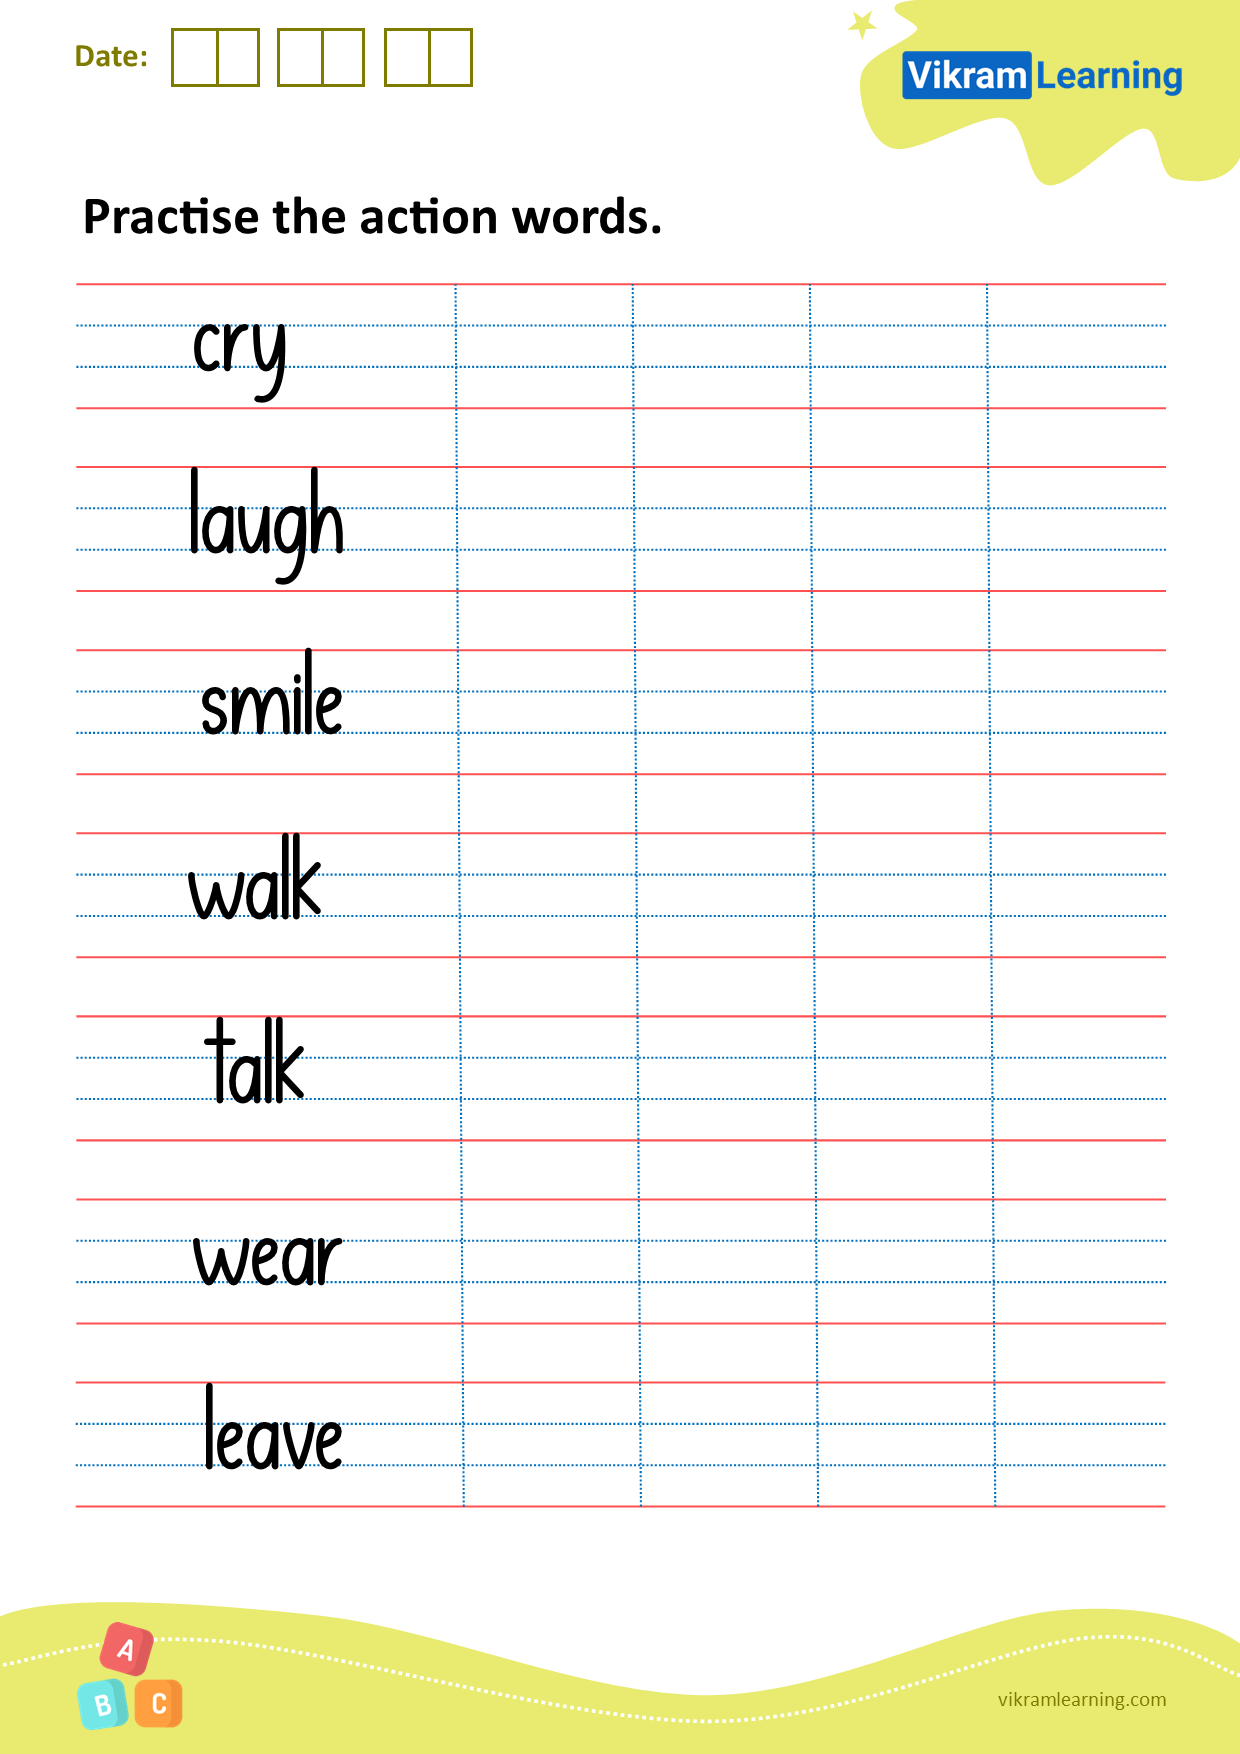 Download practice the action words worksheets